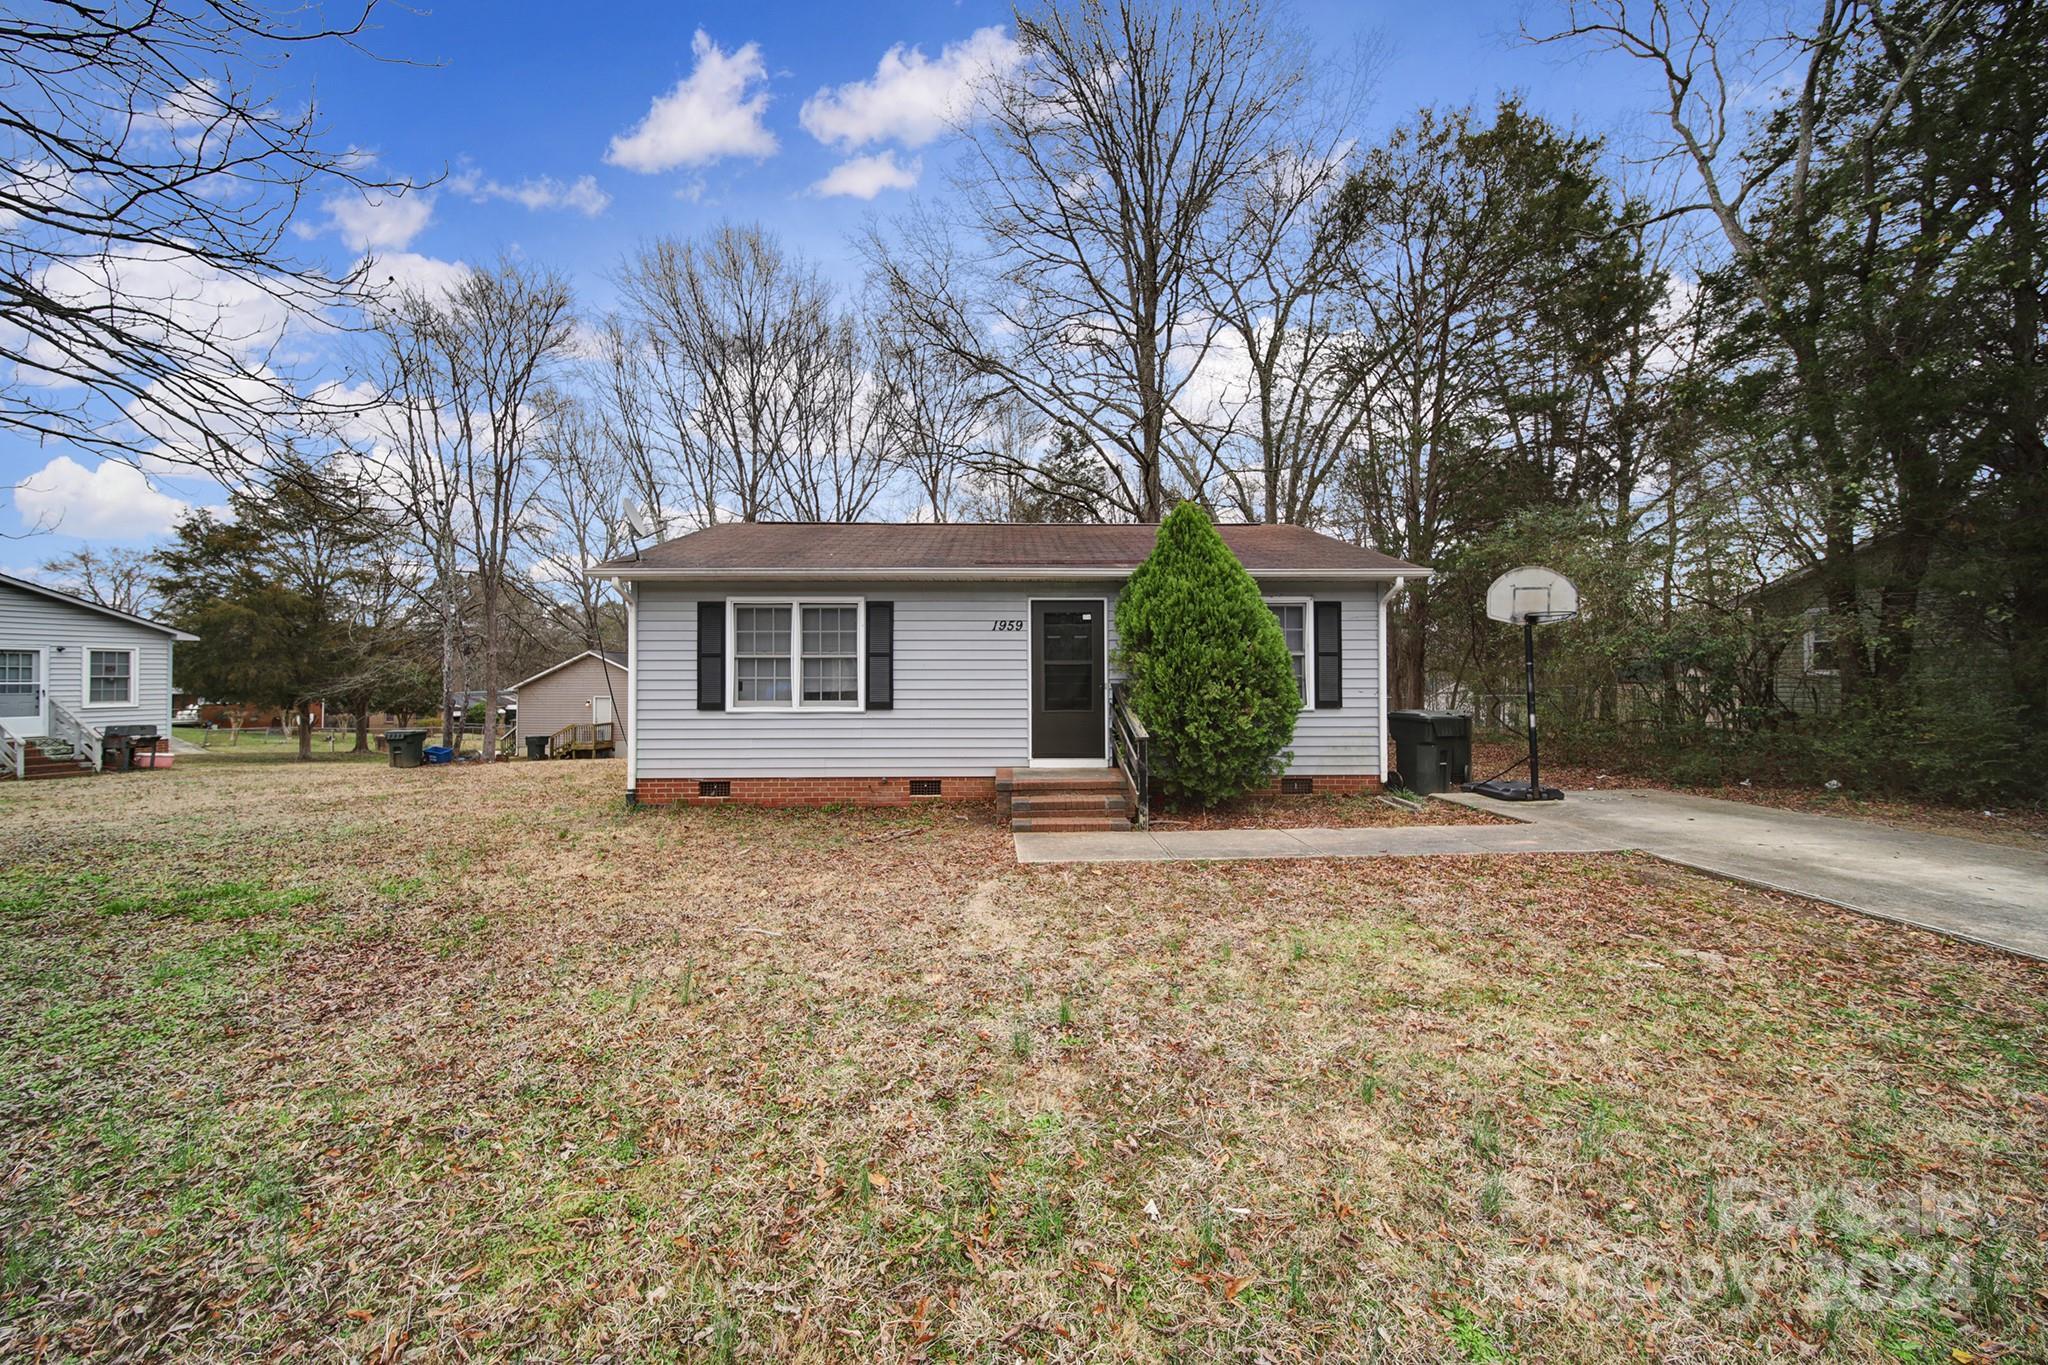 Photo one of 1959 Gilmore Dr Rock Hill SC 29730 | MLS 4137132